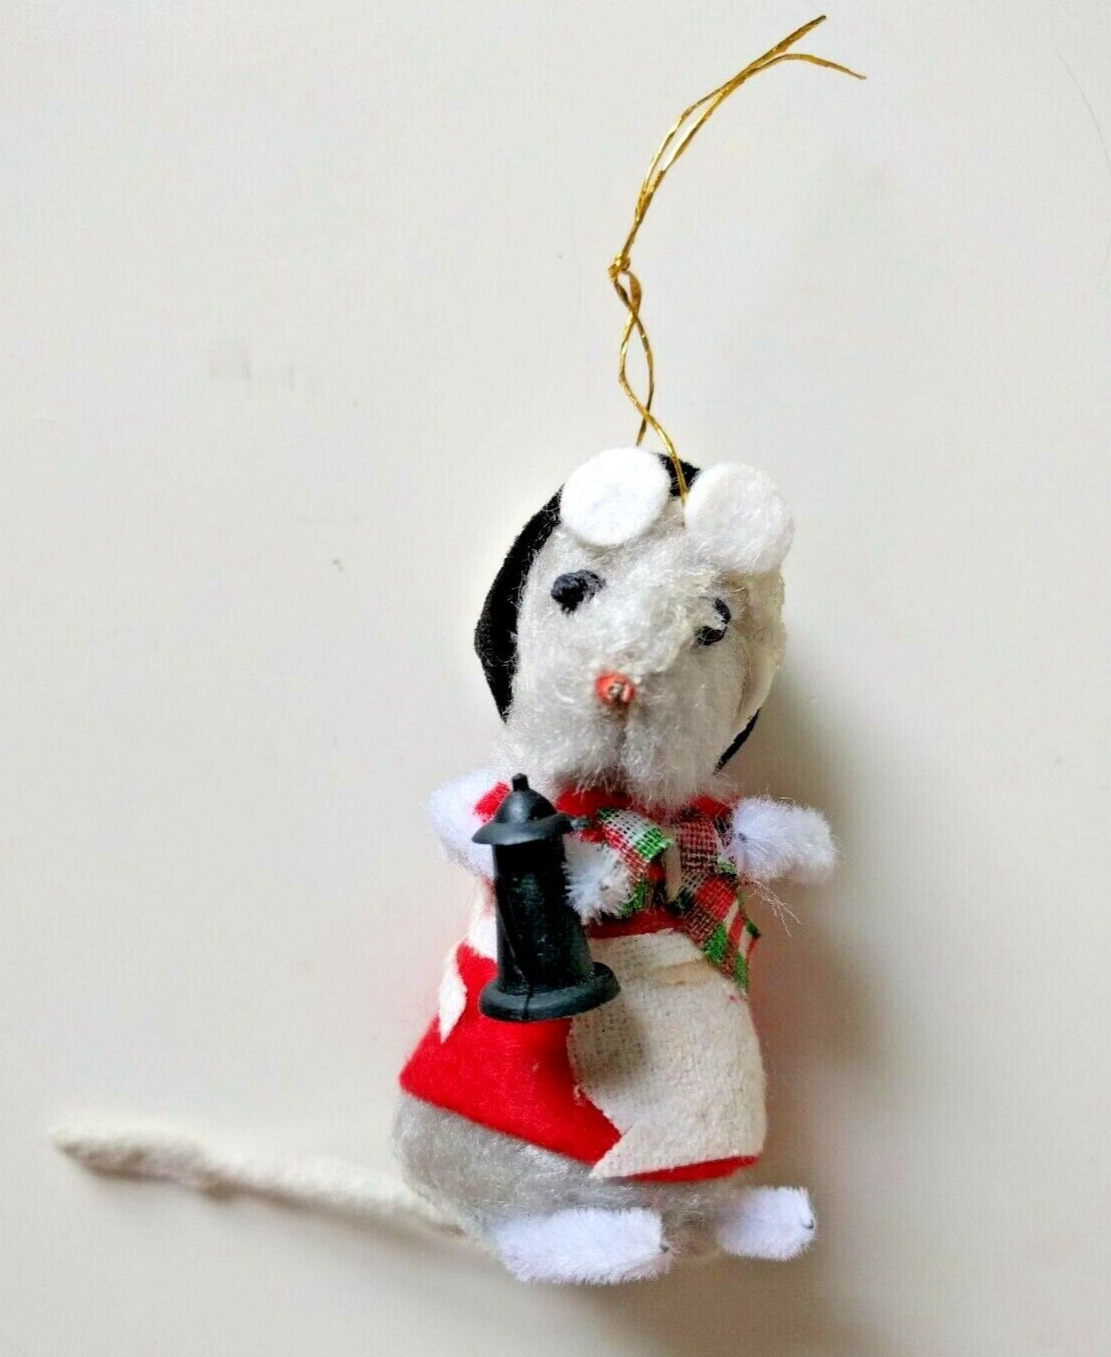 Vintage 1960s Christmas Ornament:  Missy Mouse Ready to Serve Coffee